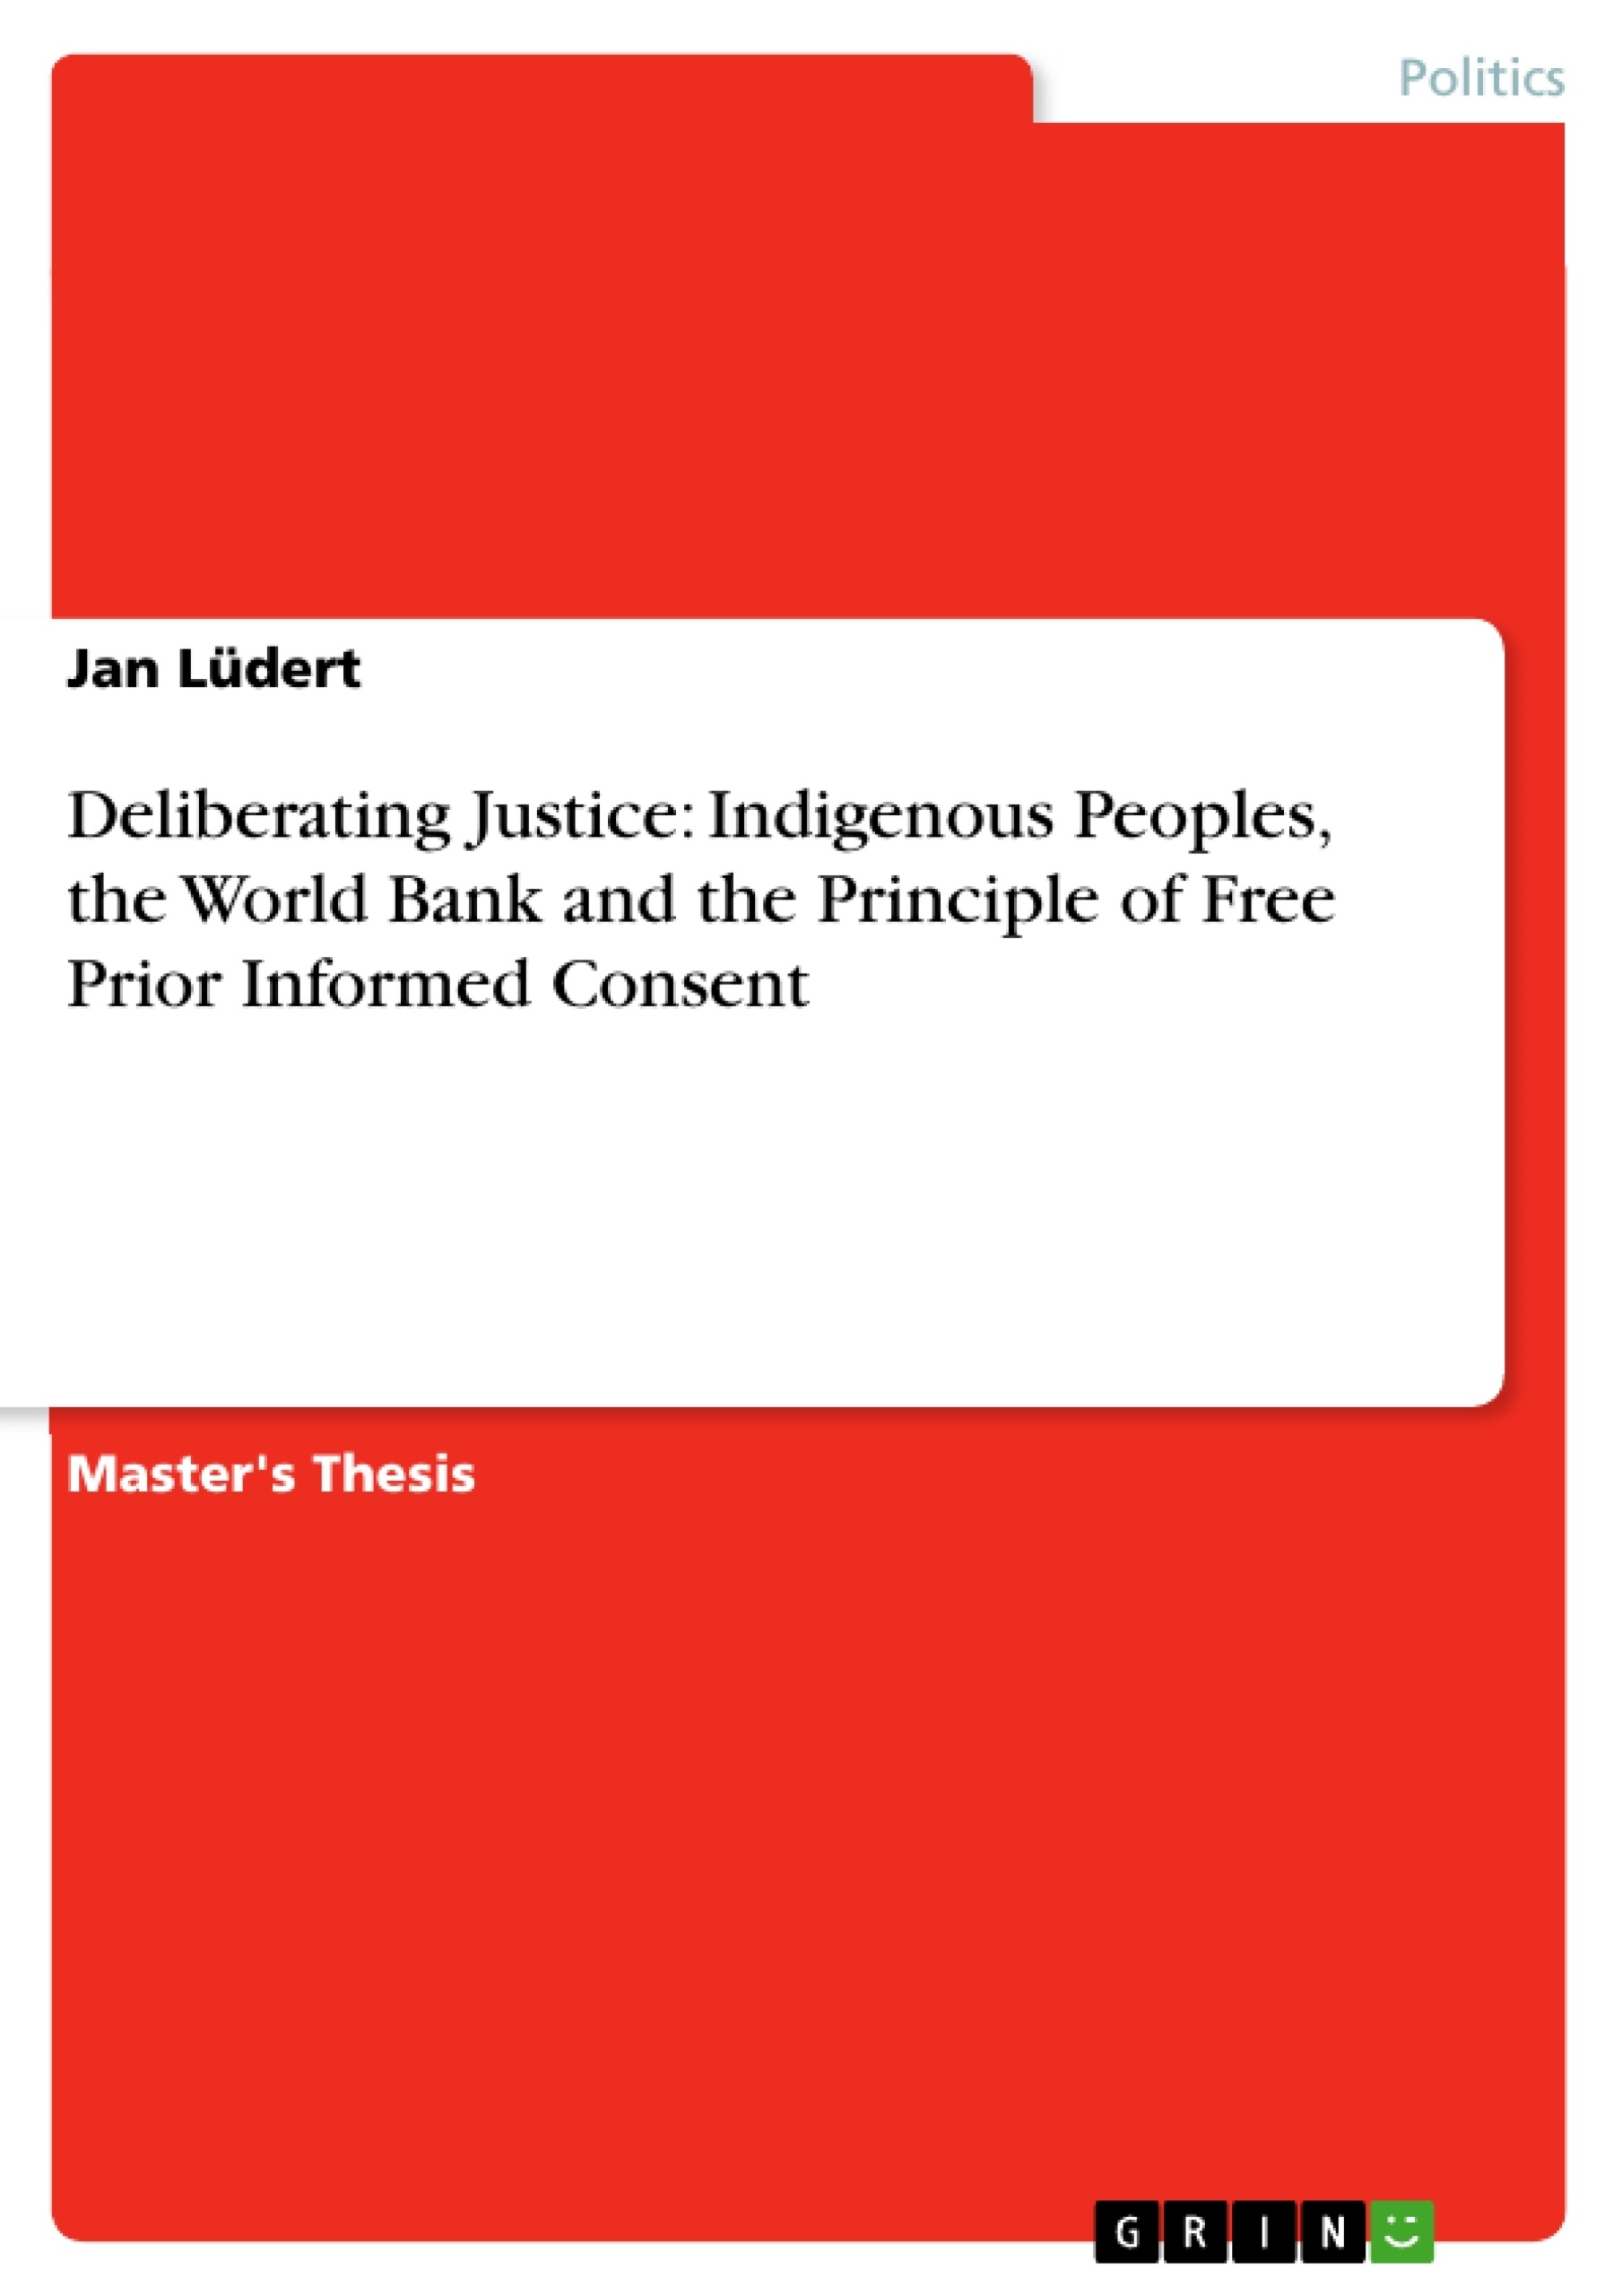 Título: Deliberating Justice: Indigenous Peoples, the World Bank and the Principle of Free Prior Informed Consent